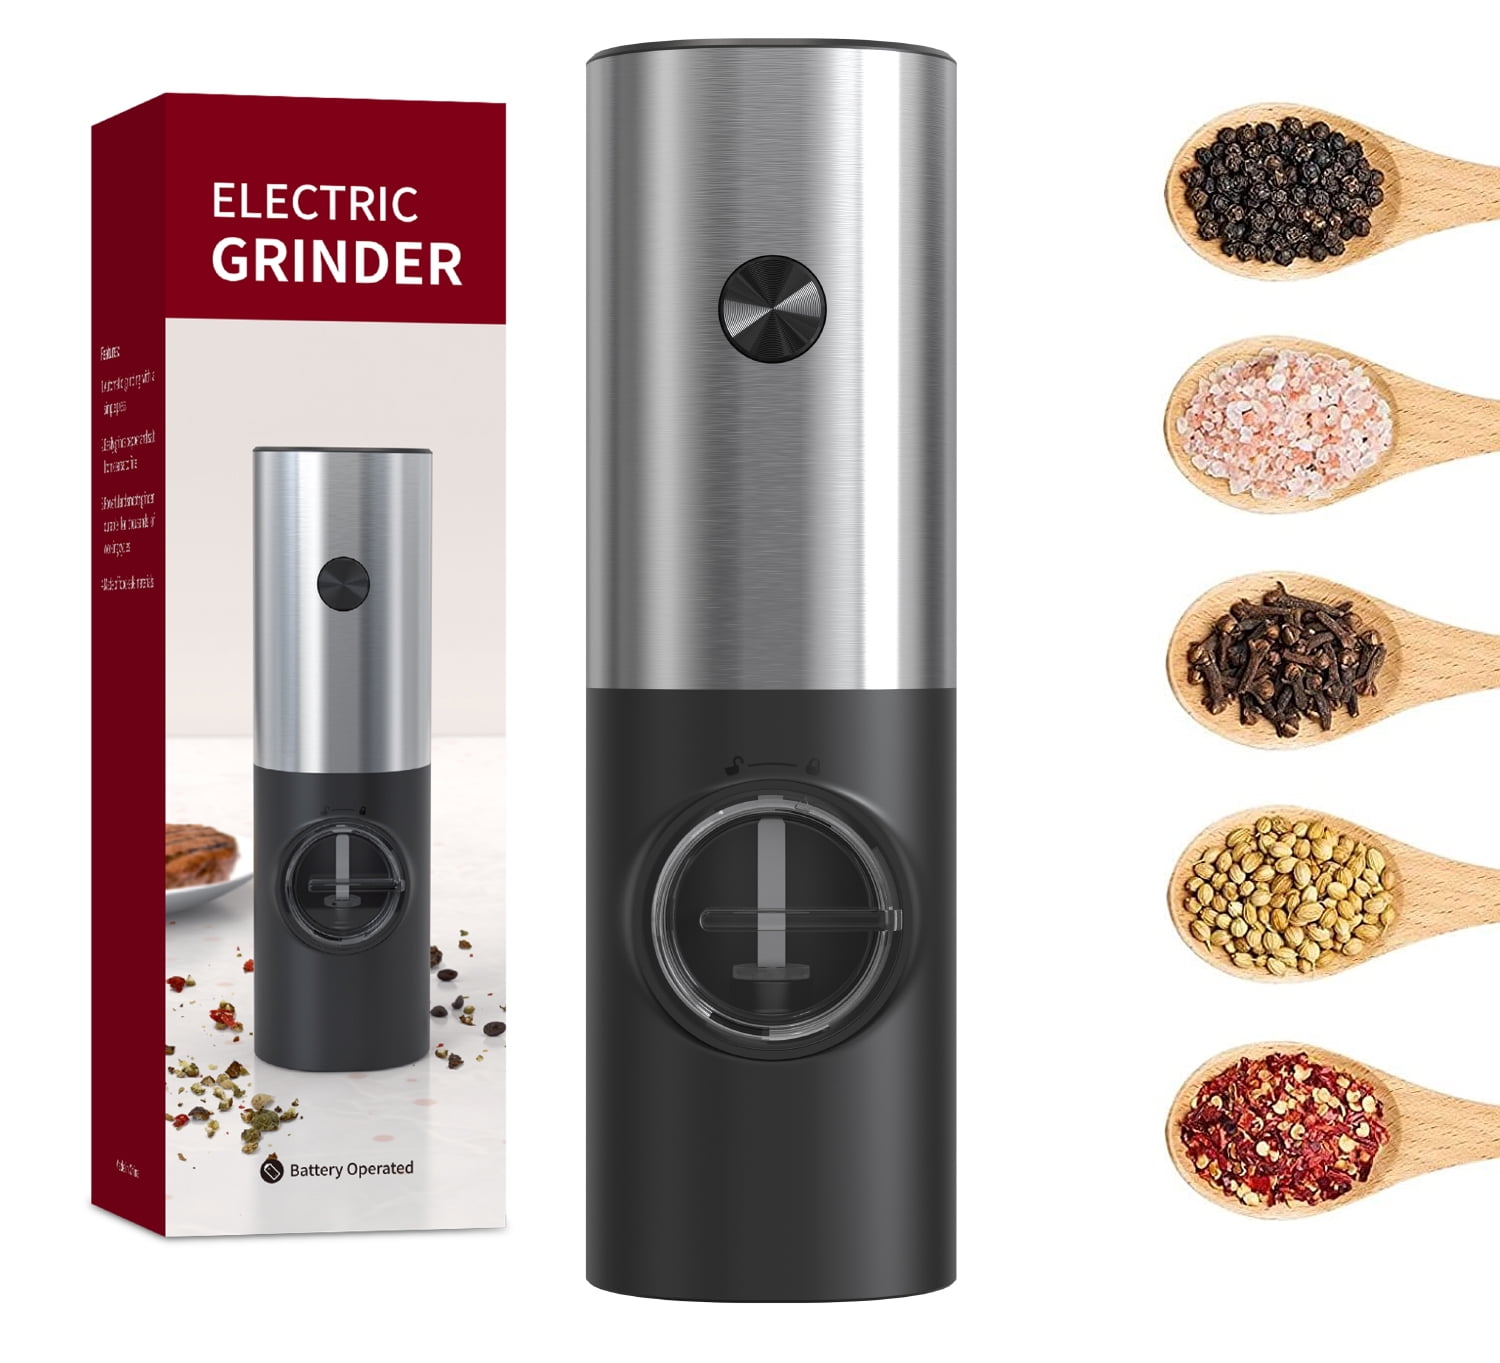 Rocyis USB Rechargeable Electric Salt and Pepper Grinder-Gravity Automatic  Spice Mill w/LED Light, Adjustable Coarseness, One Hand Operated Smart